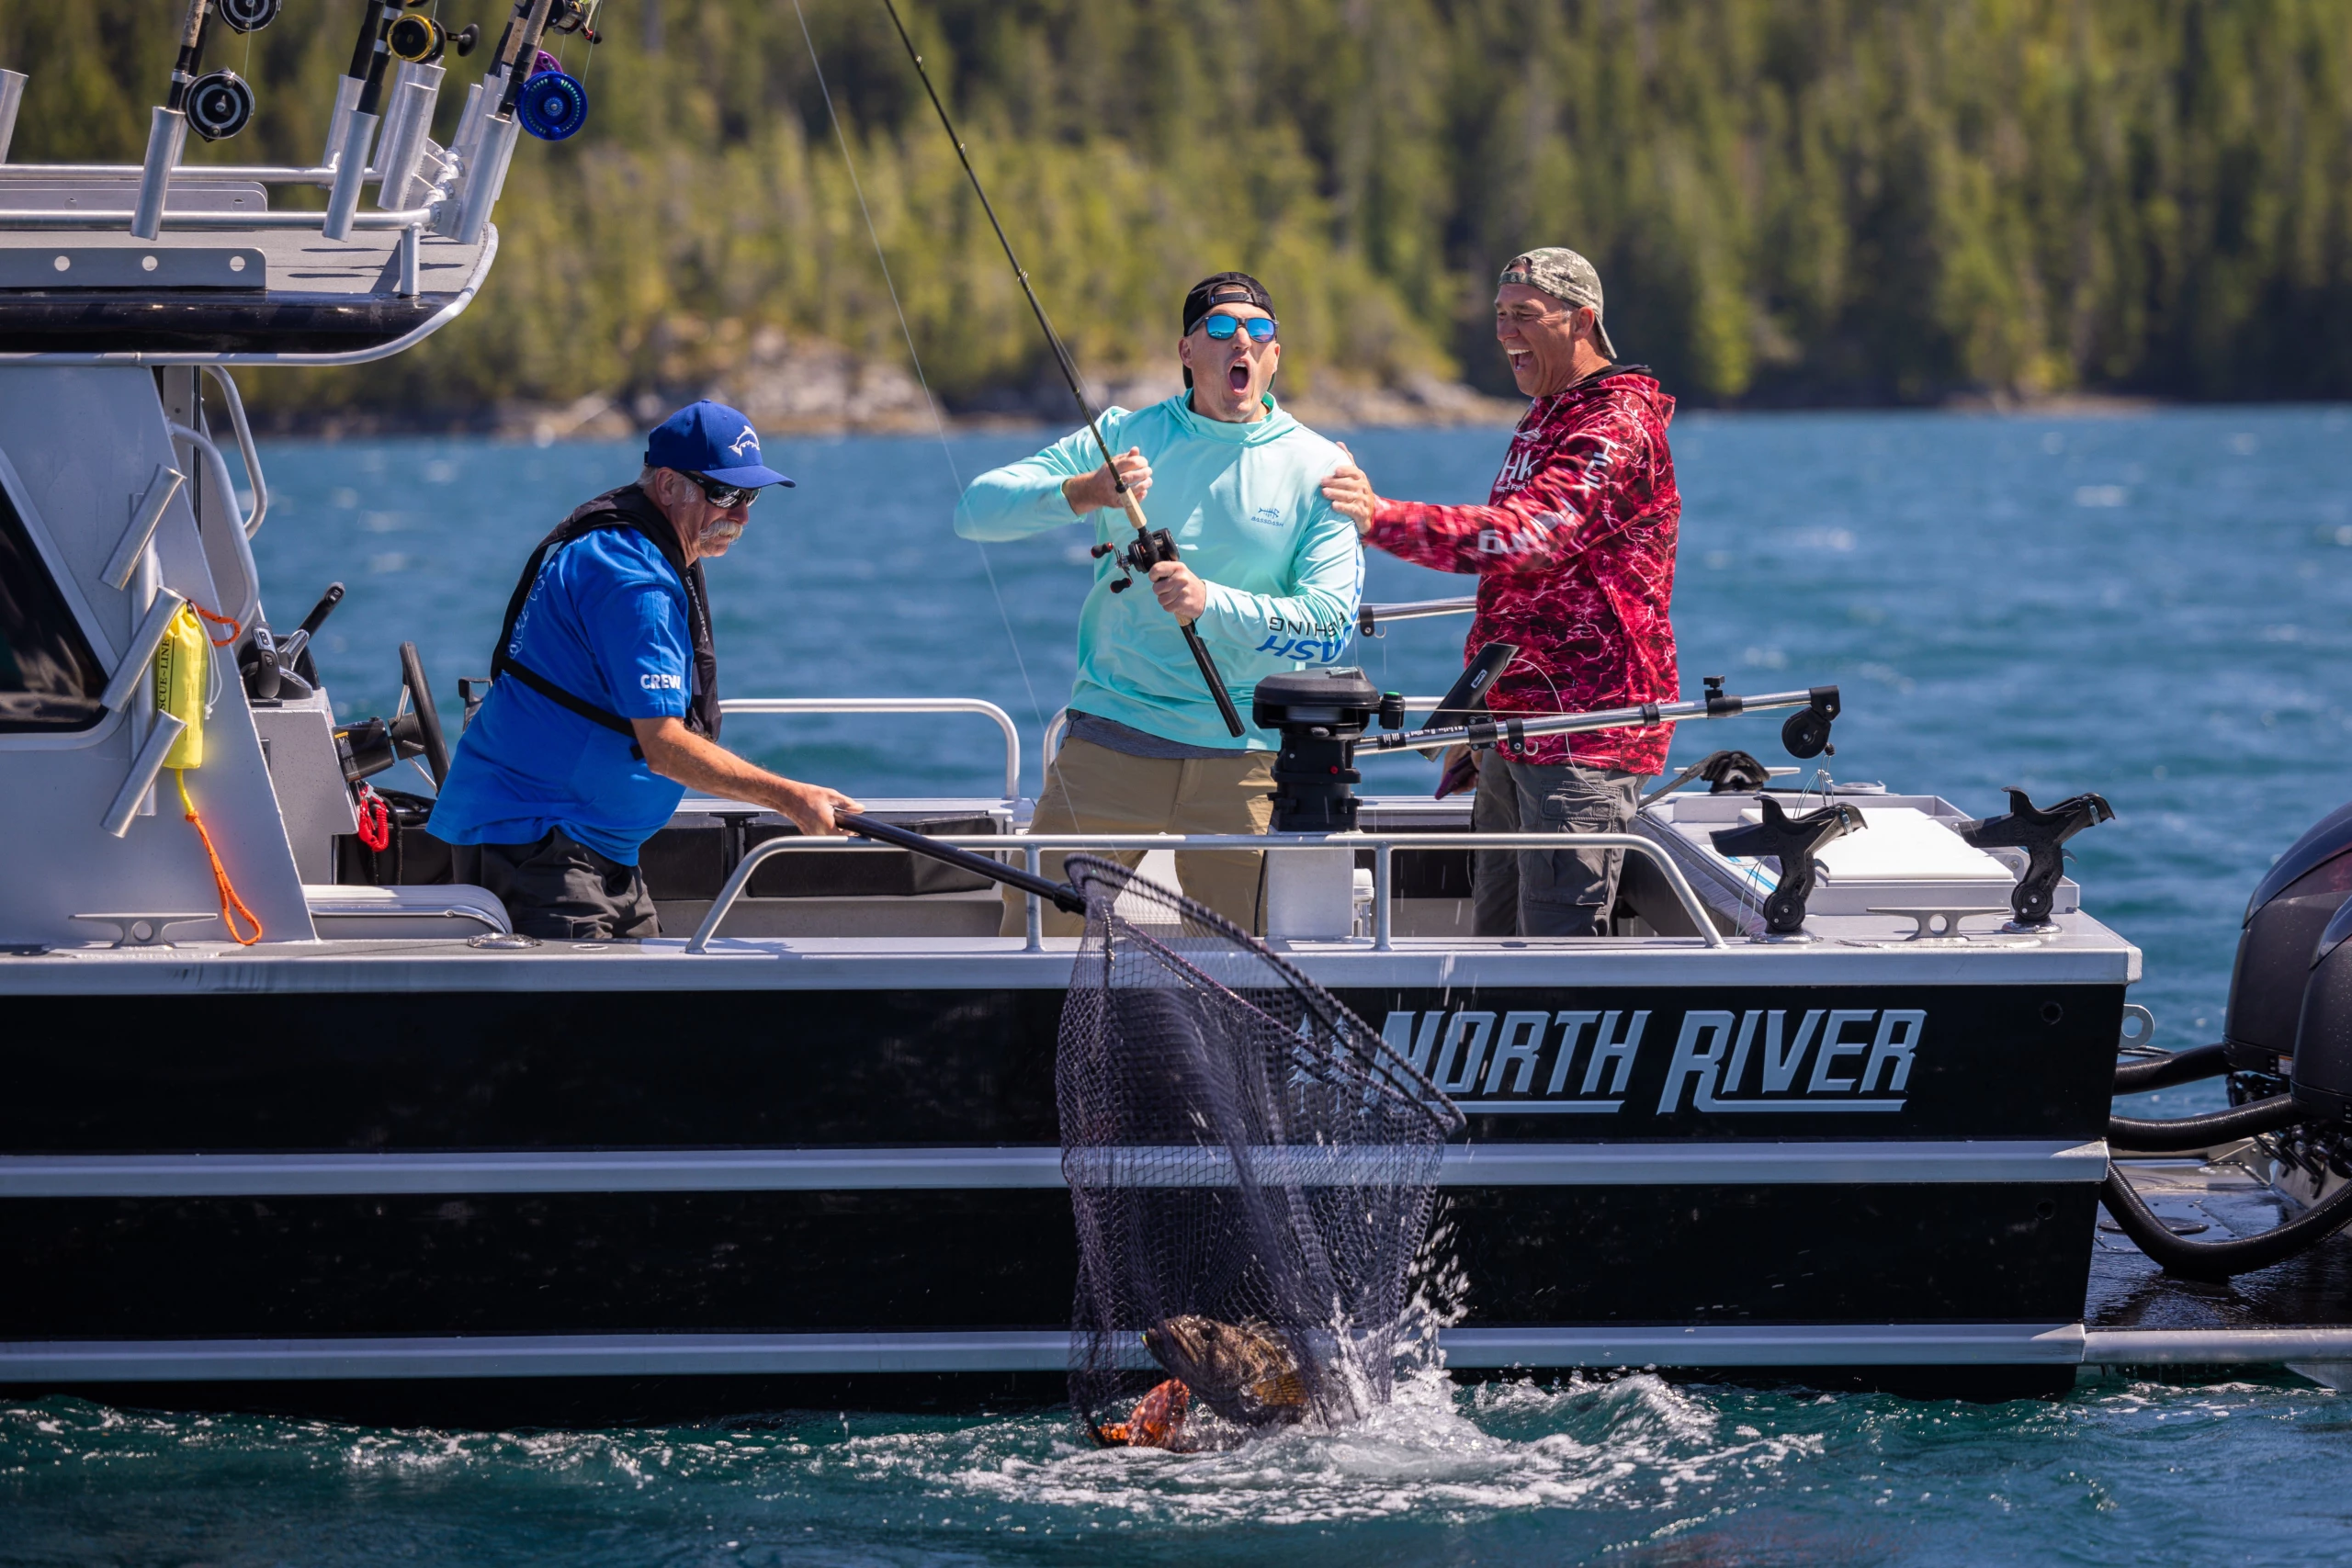 Two guest and a guide on a boat are engaged in fishing. The guide nets a large fish while one guest reels it in. They appear excited and focused.